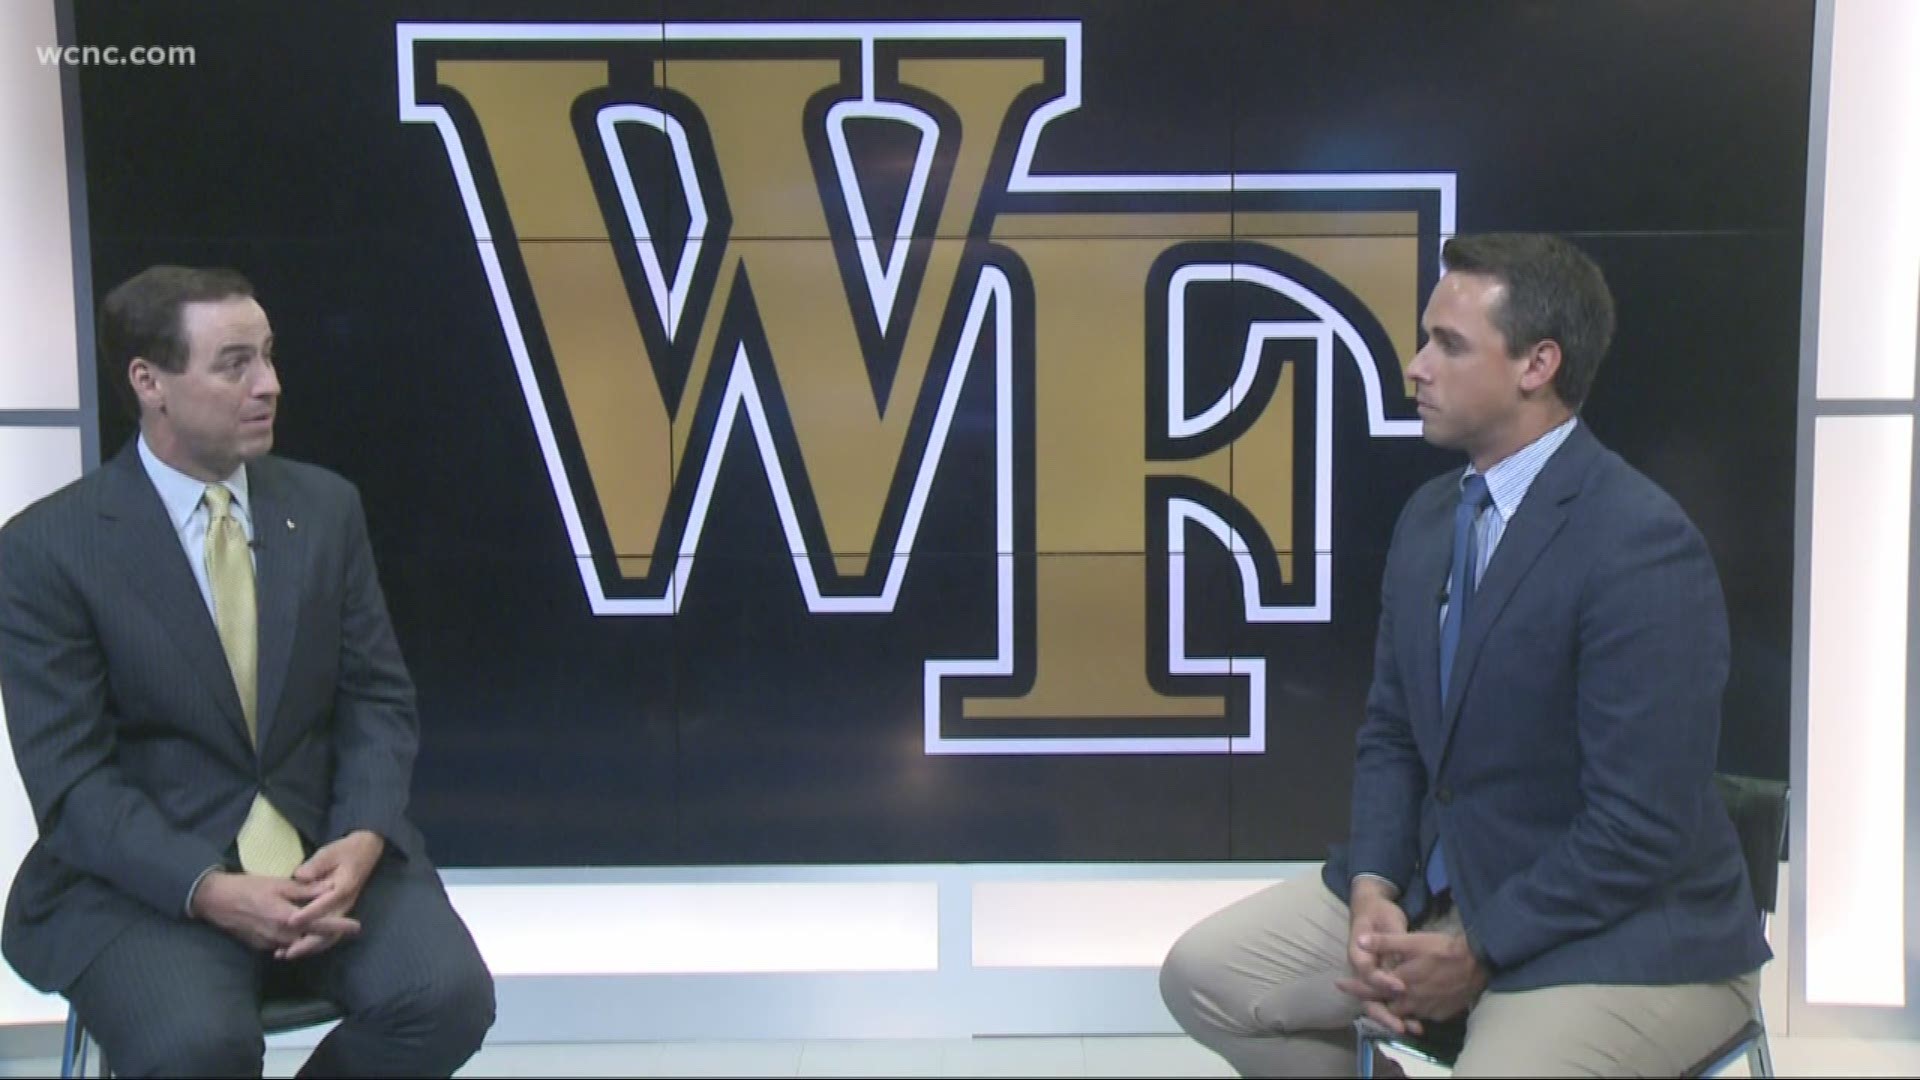 In a sit down with sports director Nick Carboni, Currie talked about the decision to extend football coach Dave Clawson and keep basketball coach Danny Manning.